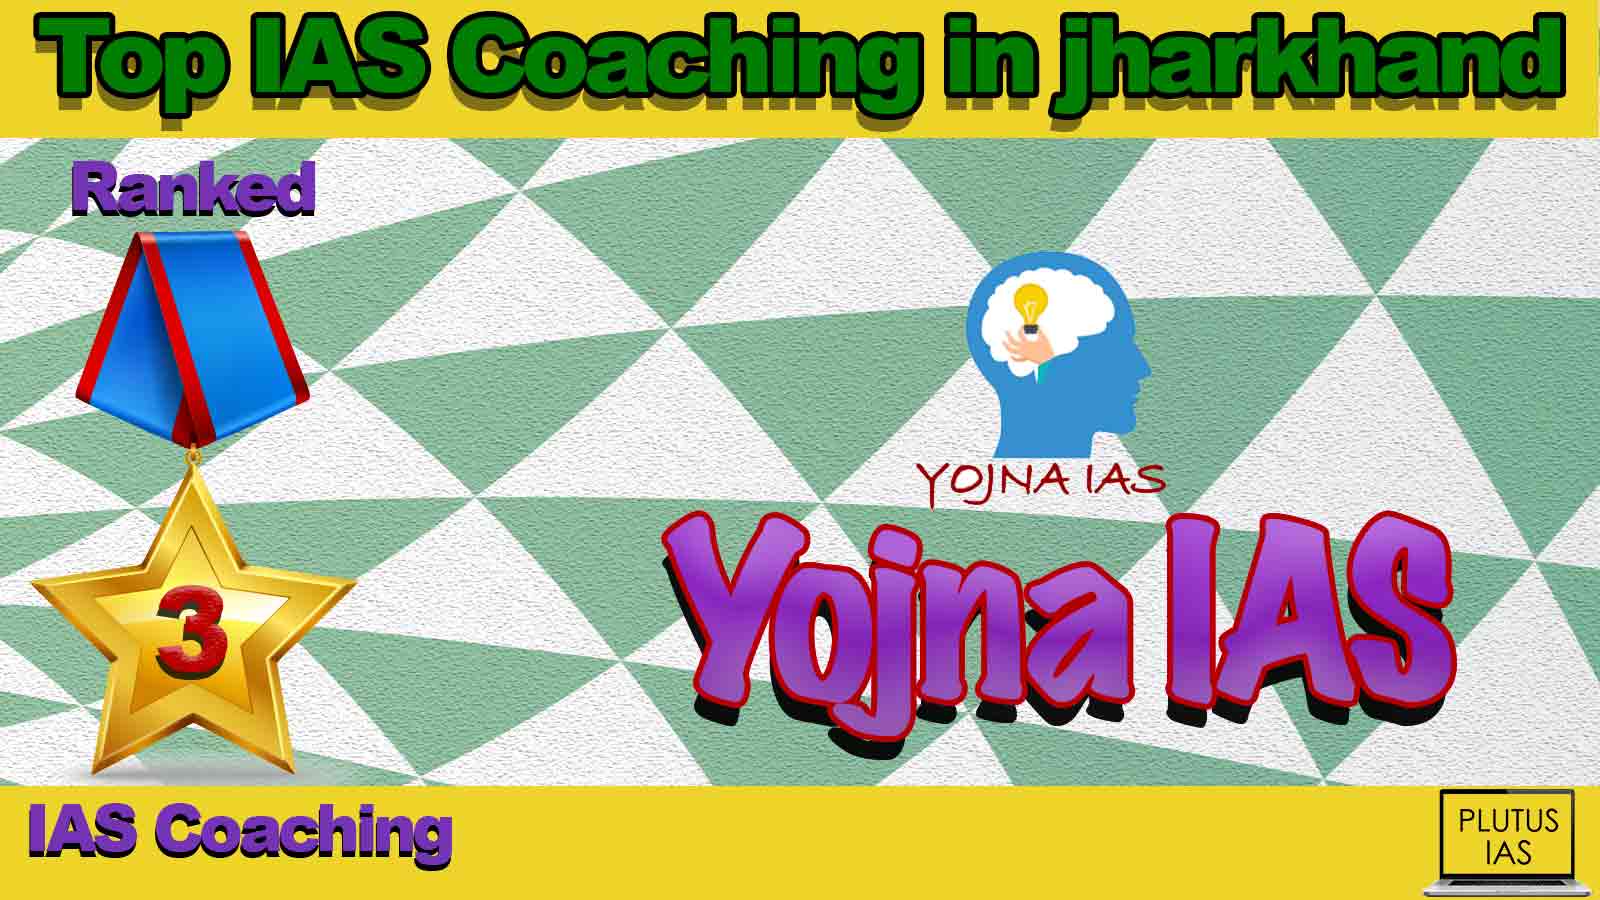 Best IAS Coaching in Jharkhand